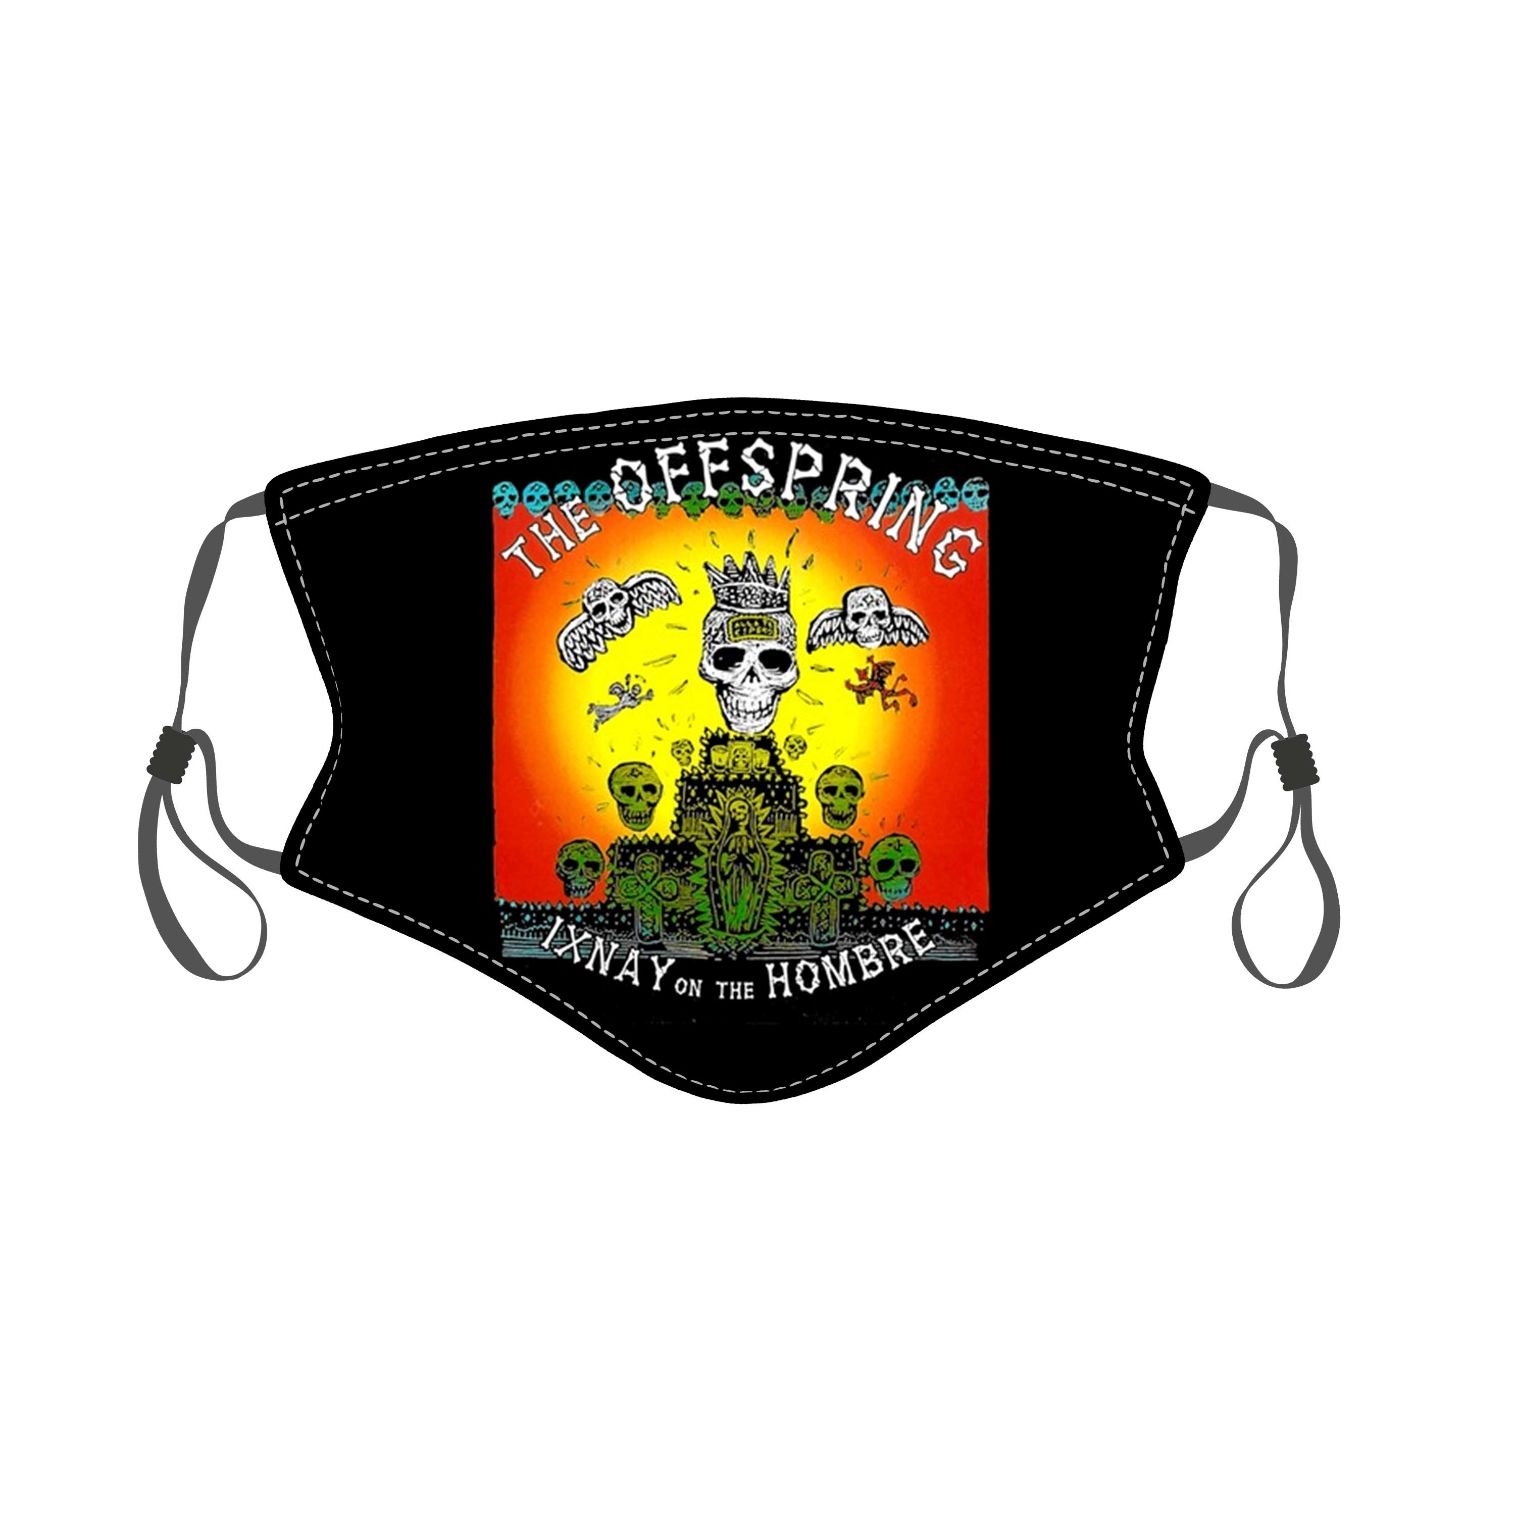 1997 The OFFSPRING Vintage All I Want Era Ixnay Mask